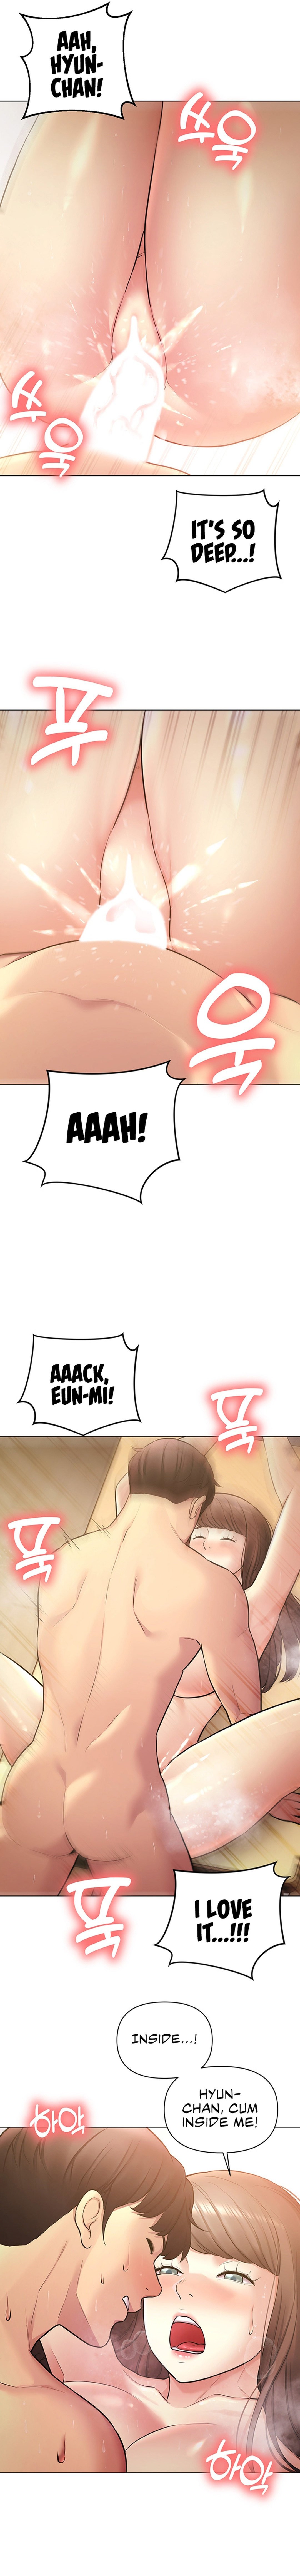 the-girls-i-couldnt-date-before-chap-36-19